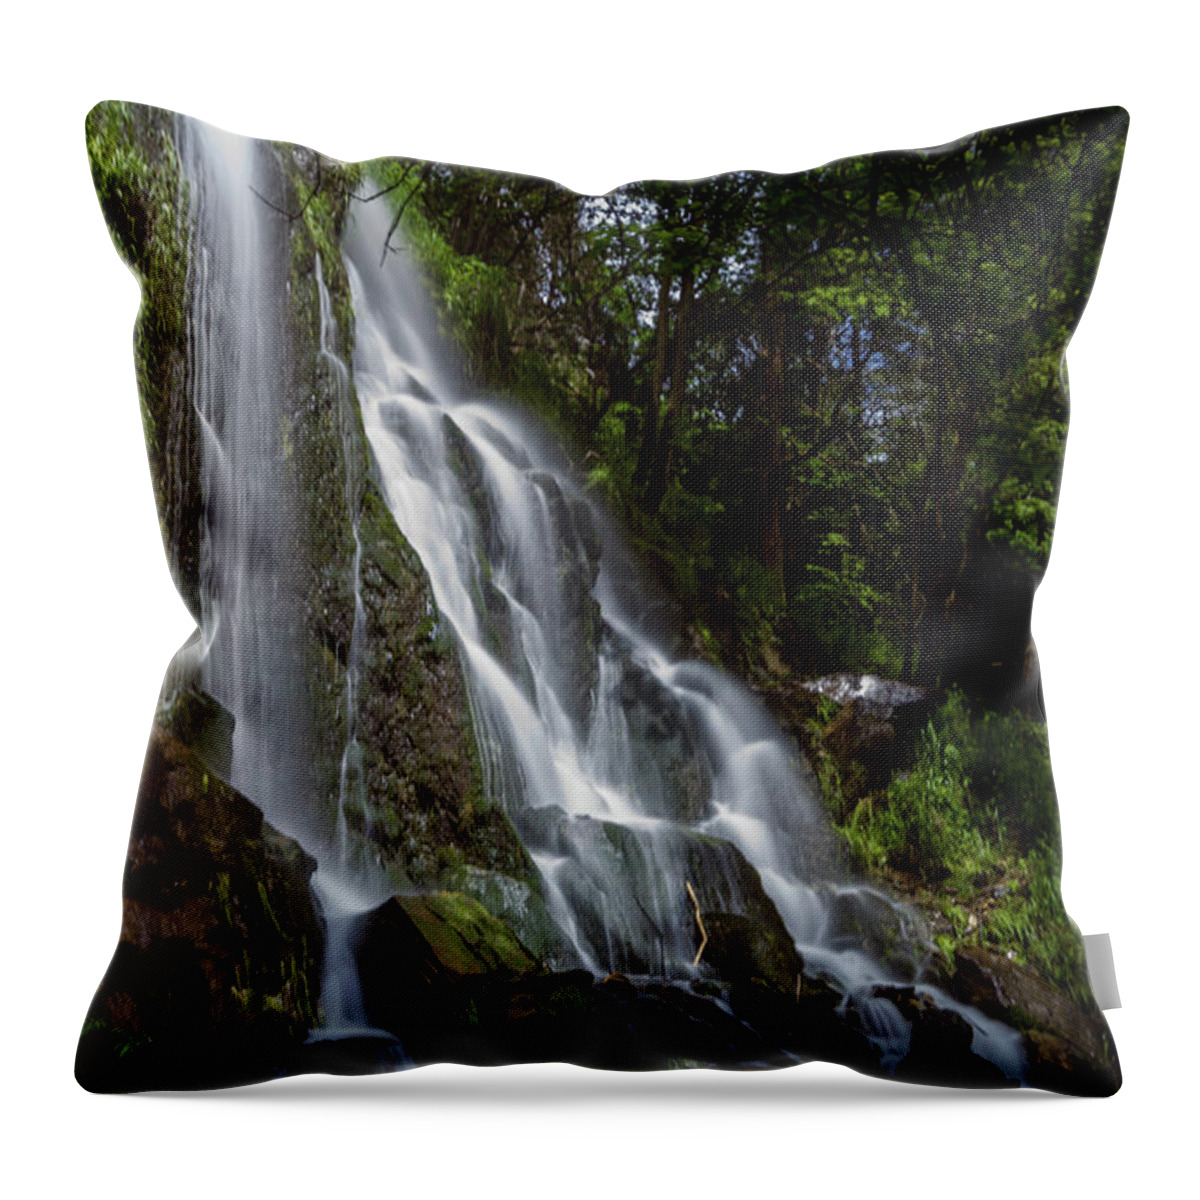 Water Throw Pillow featuring the photograph Koenigshuette Waterfall , Harz by Andreas Levi